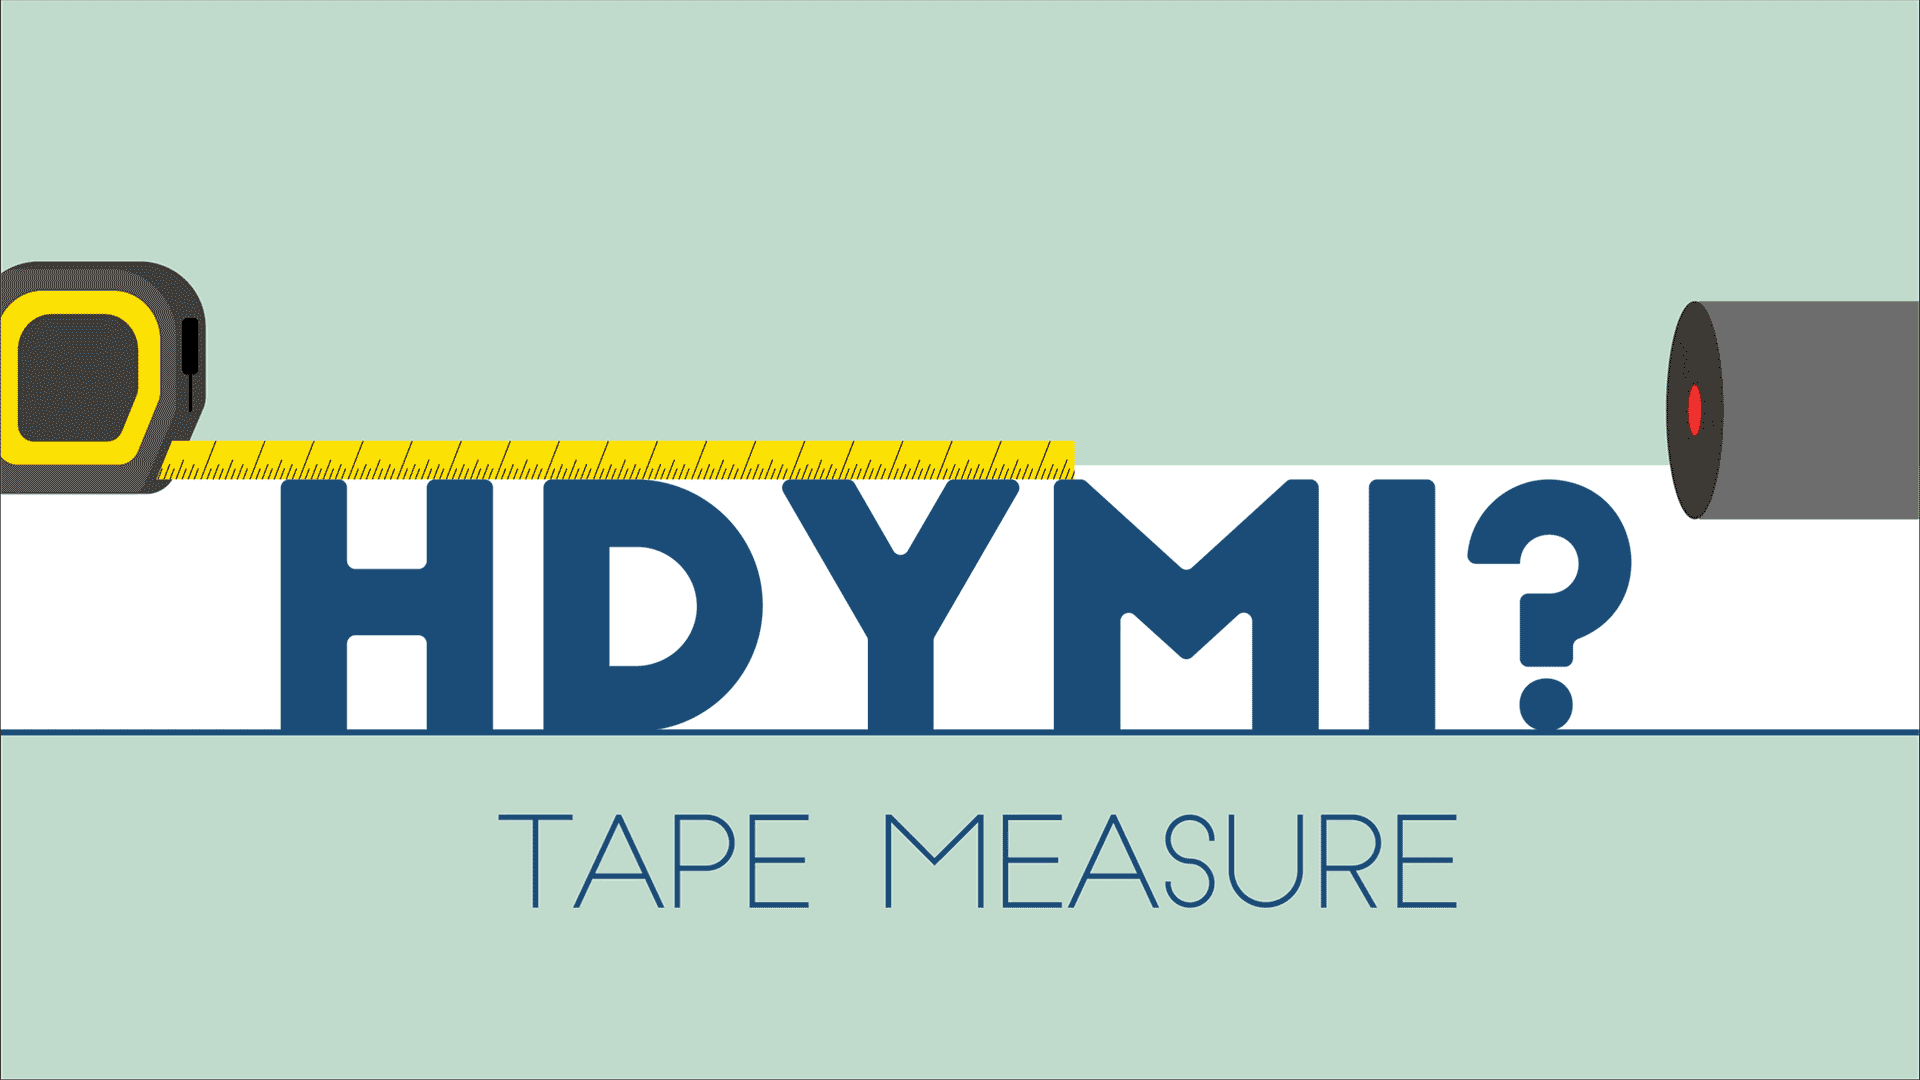 Animated illustration shows a tape measure with a laser beam moving along it and says "HDYMI? Tape Measure."